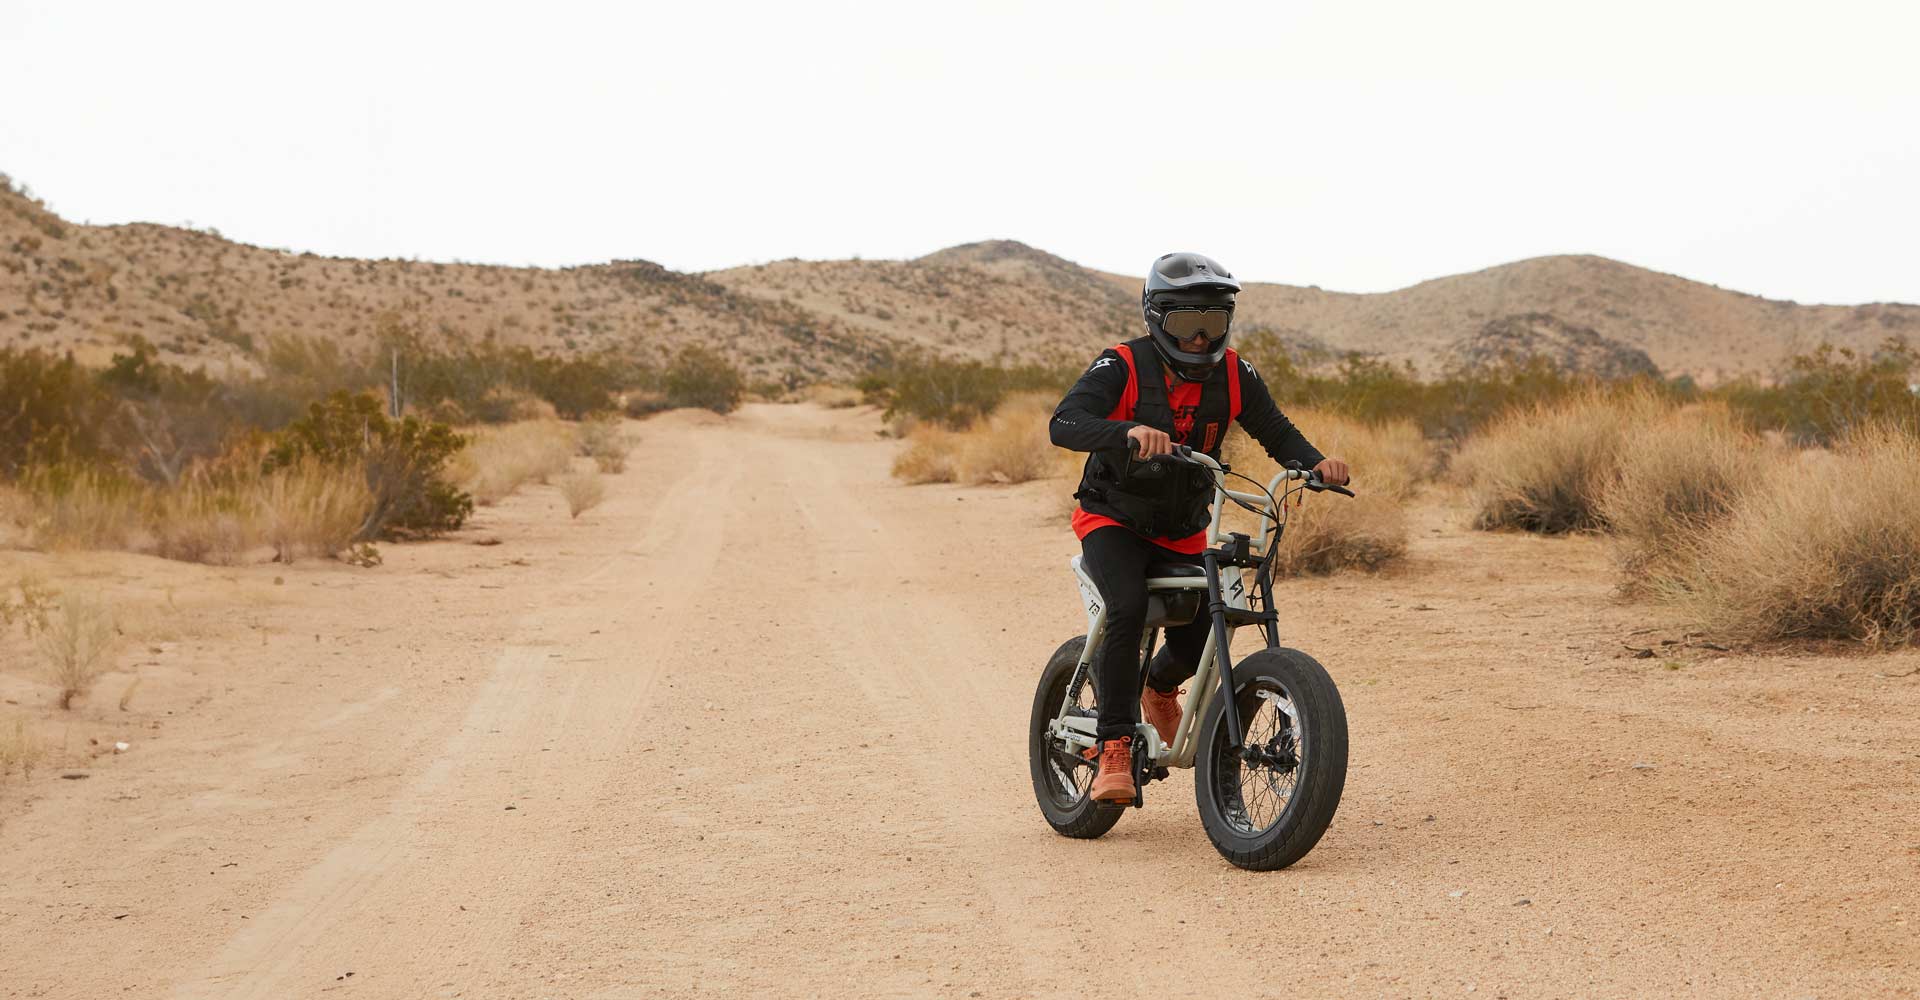 a SUPER73 rider riding out in the desert while wearing the tactical vest.